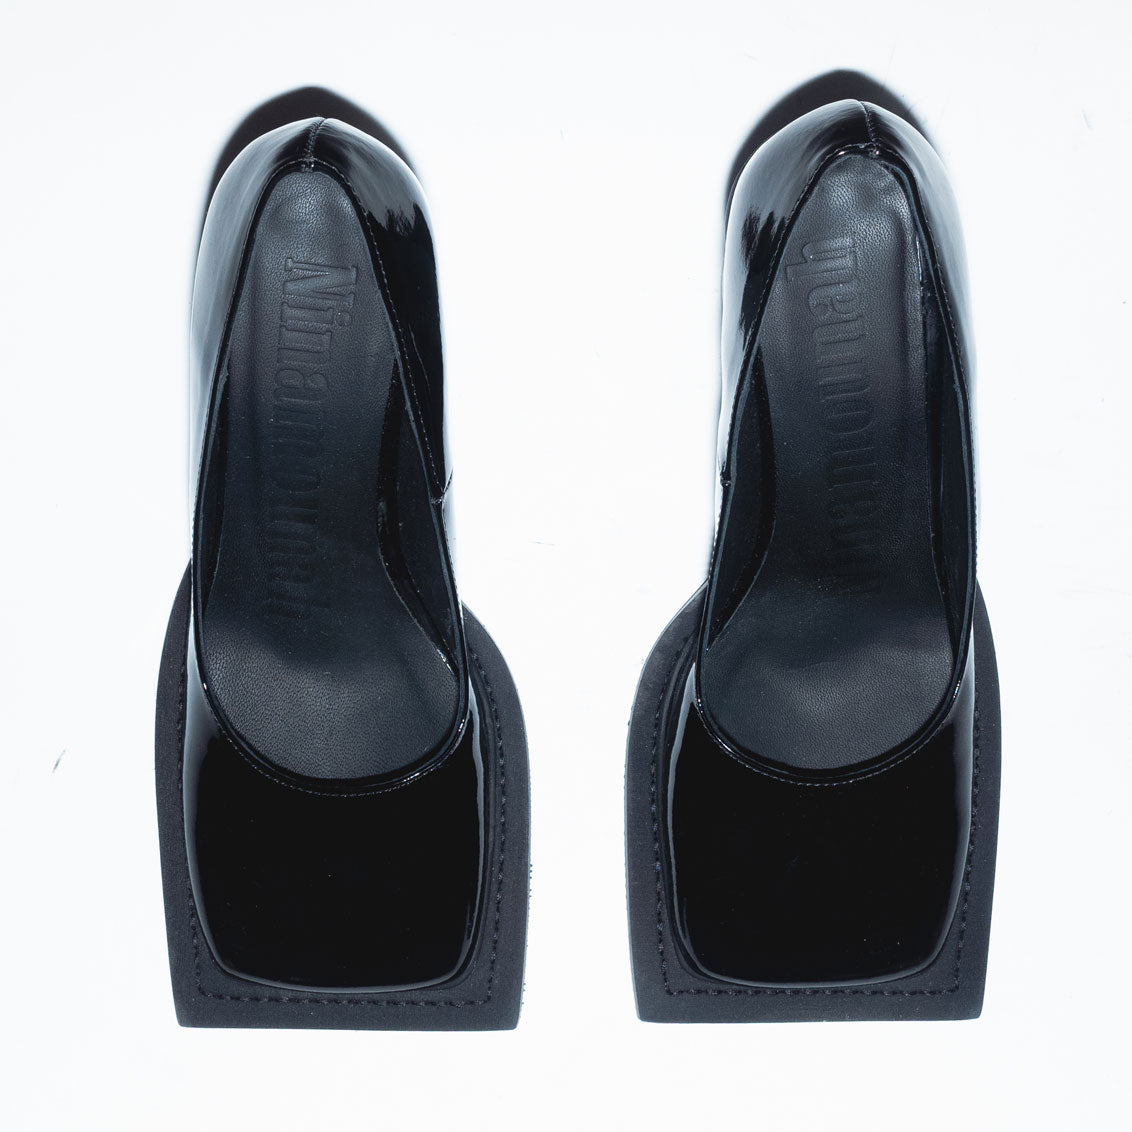 Runway Howl Pumps in Black Patent Leather